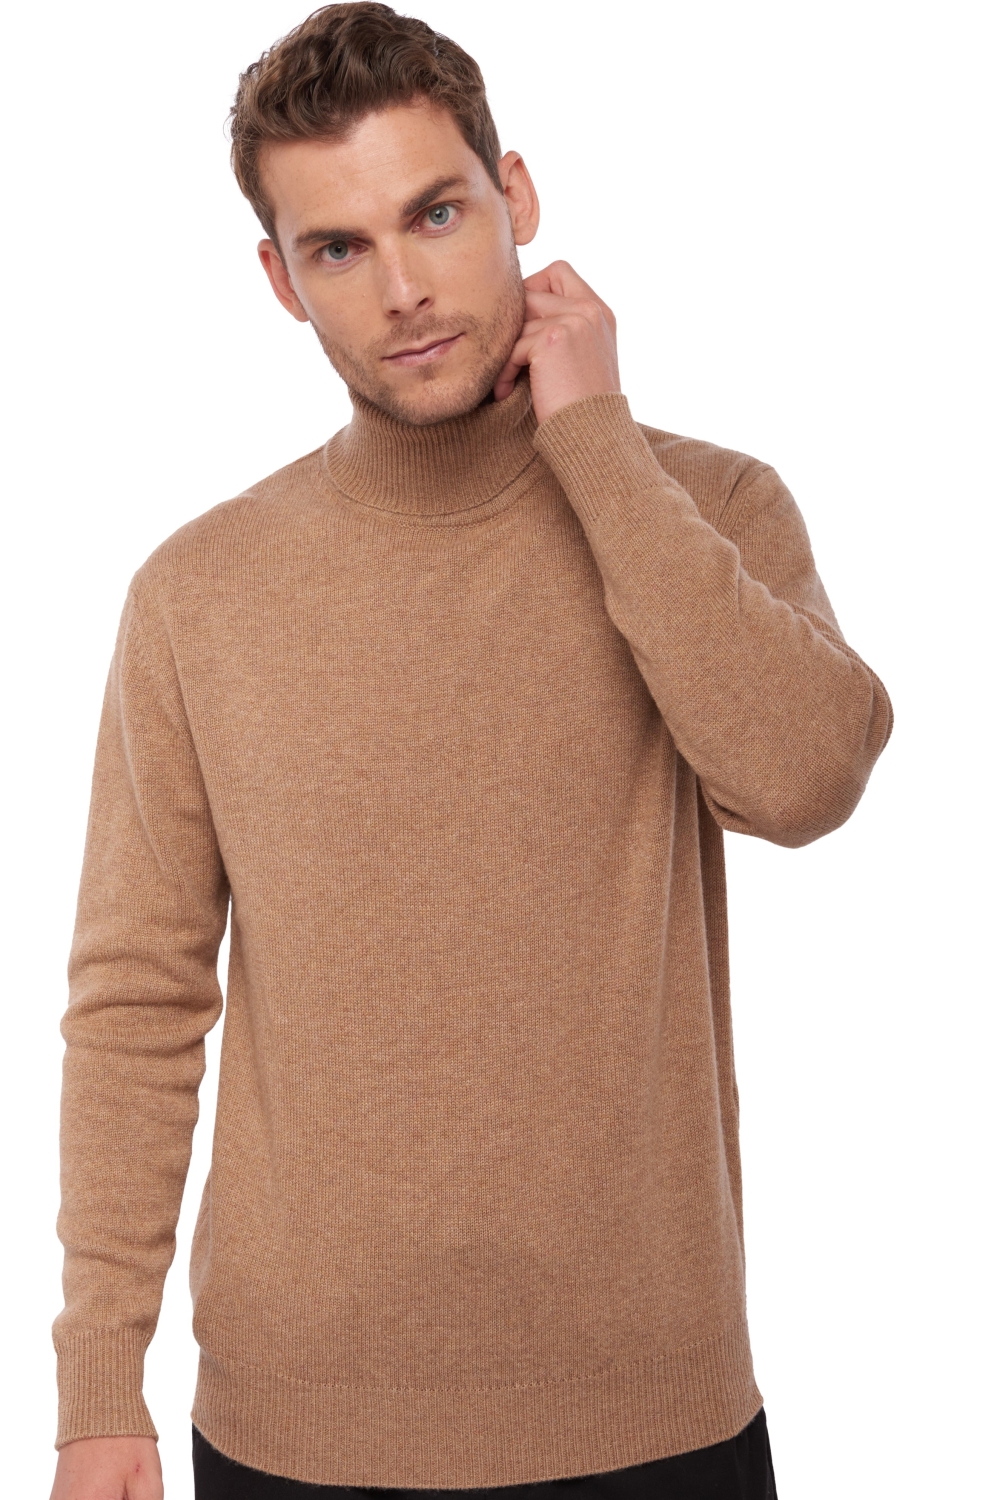 Cachemire pull homme col roule edgar 4f camel chine 4xl